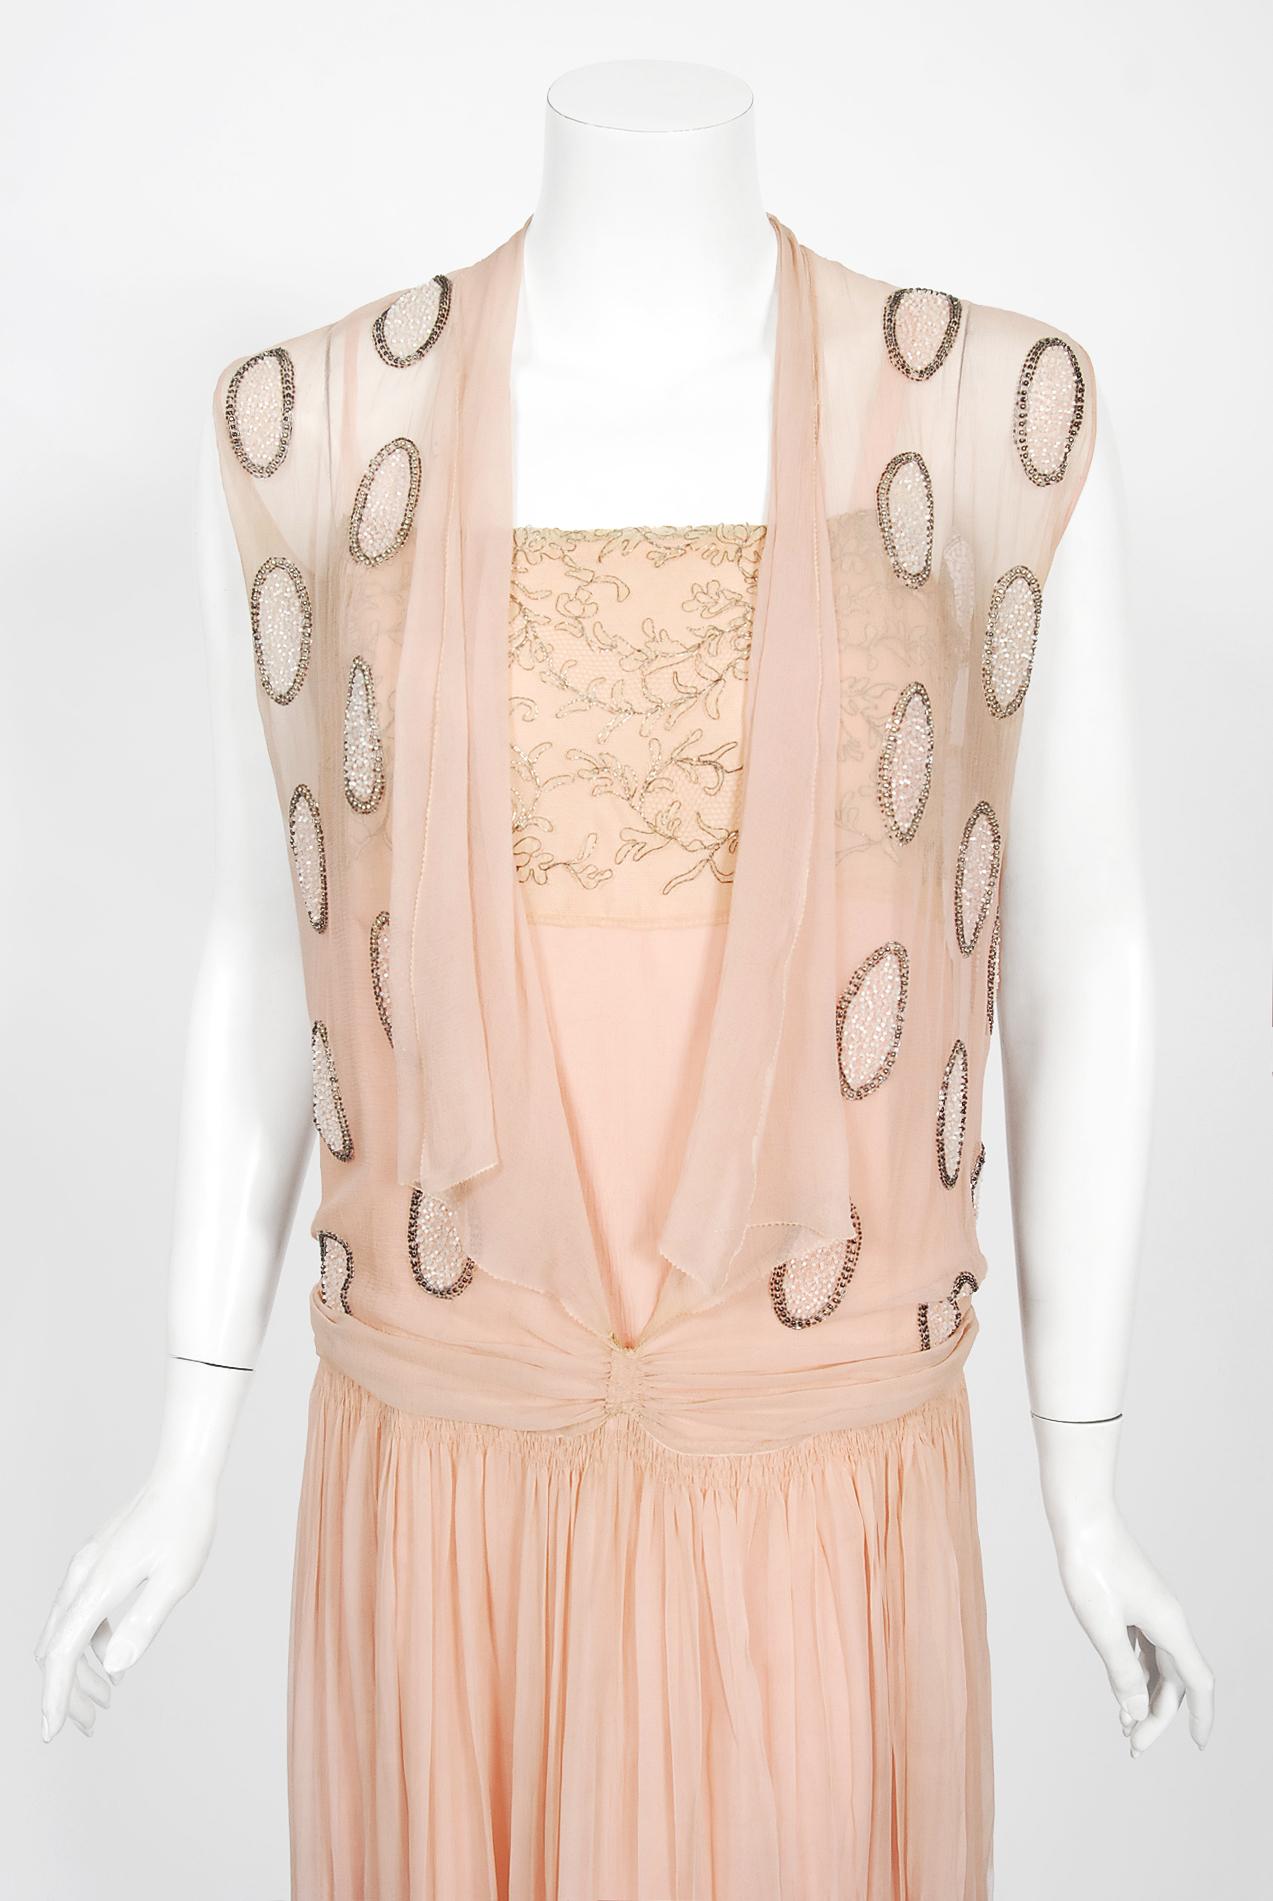 Undiminished by time, this 1920's ballerina slipper pink beaded flapper dance dress still casts its magical spell. This exceptional French beauty is fashioned in silk chiffon with lavish pink, ivory and metallic silver beading. I adore the bold deco